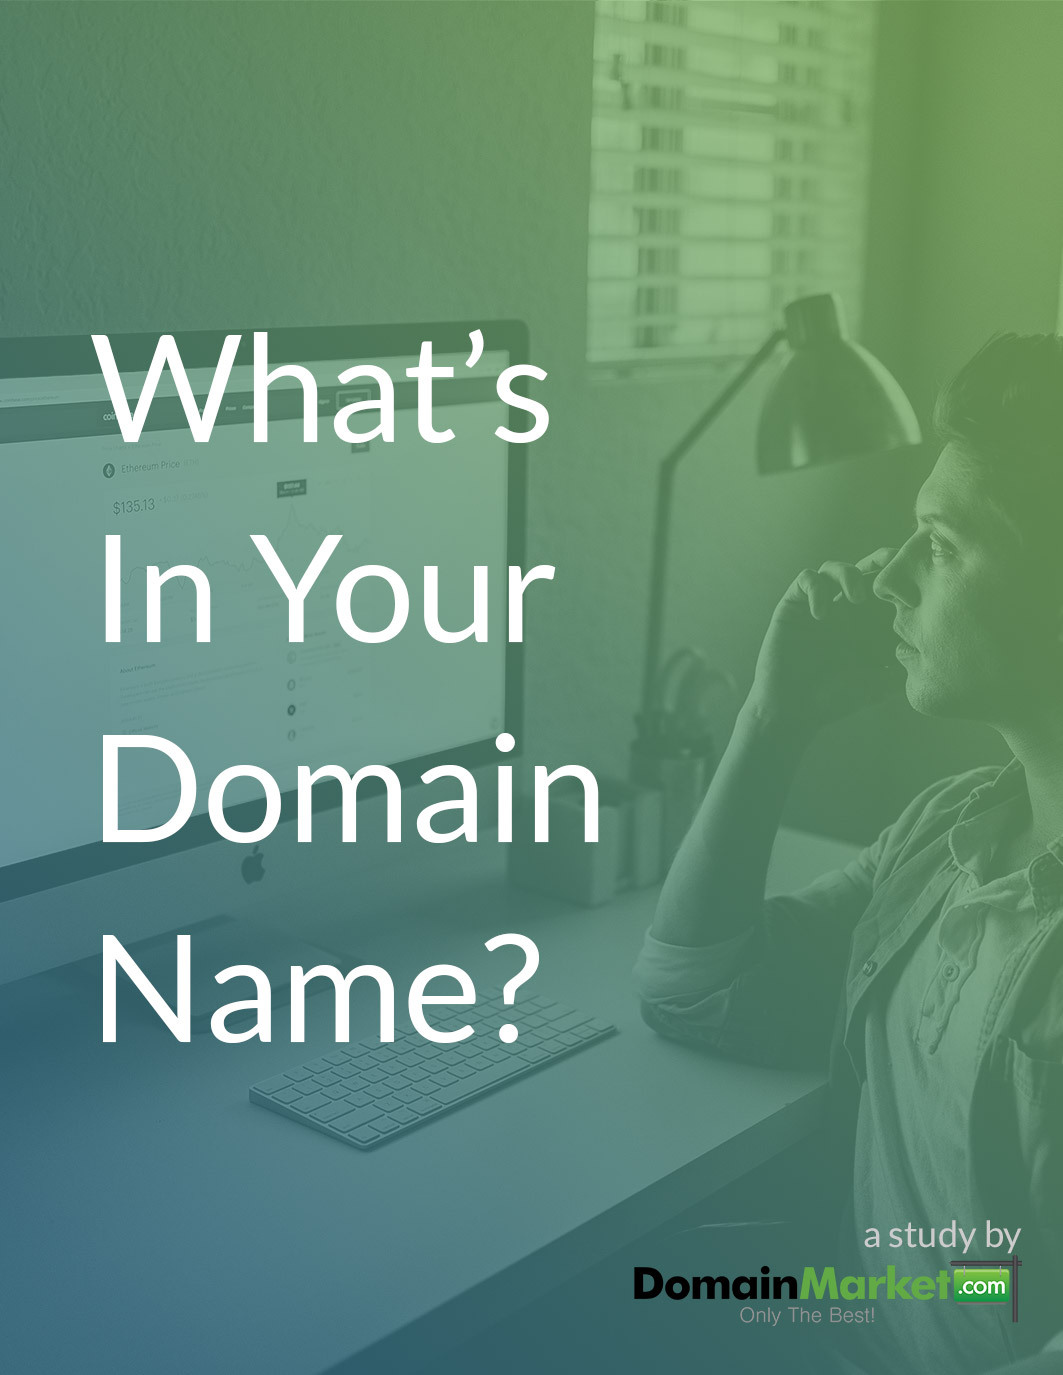 What's in your Domain Name?